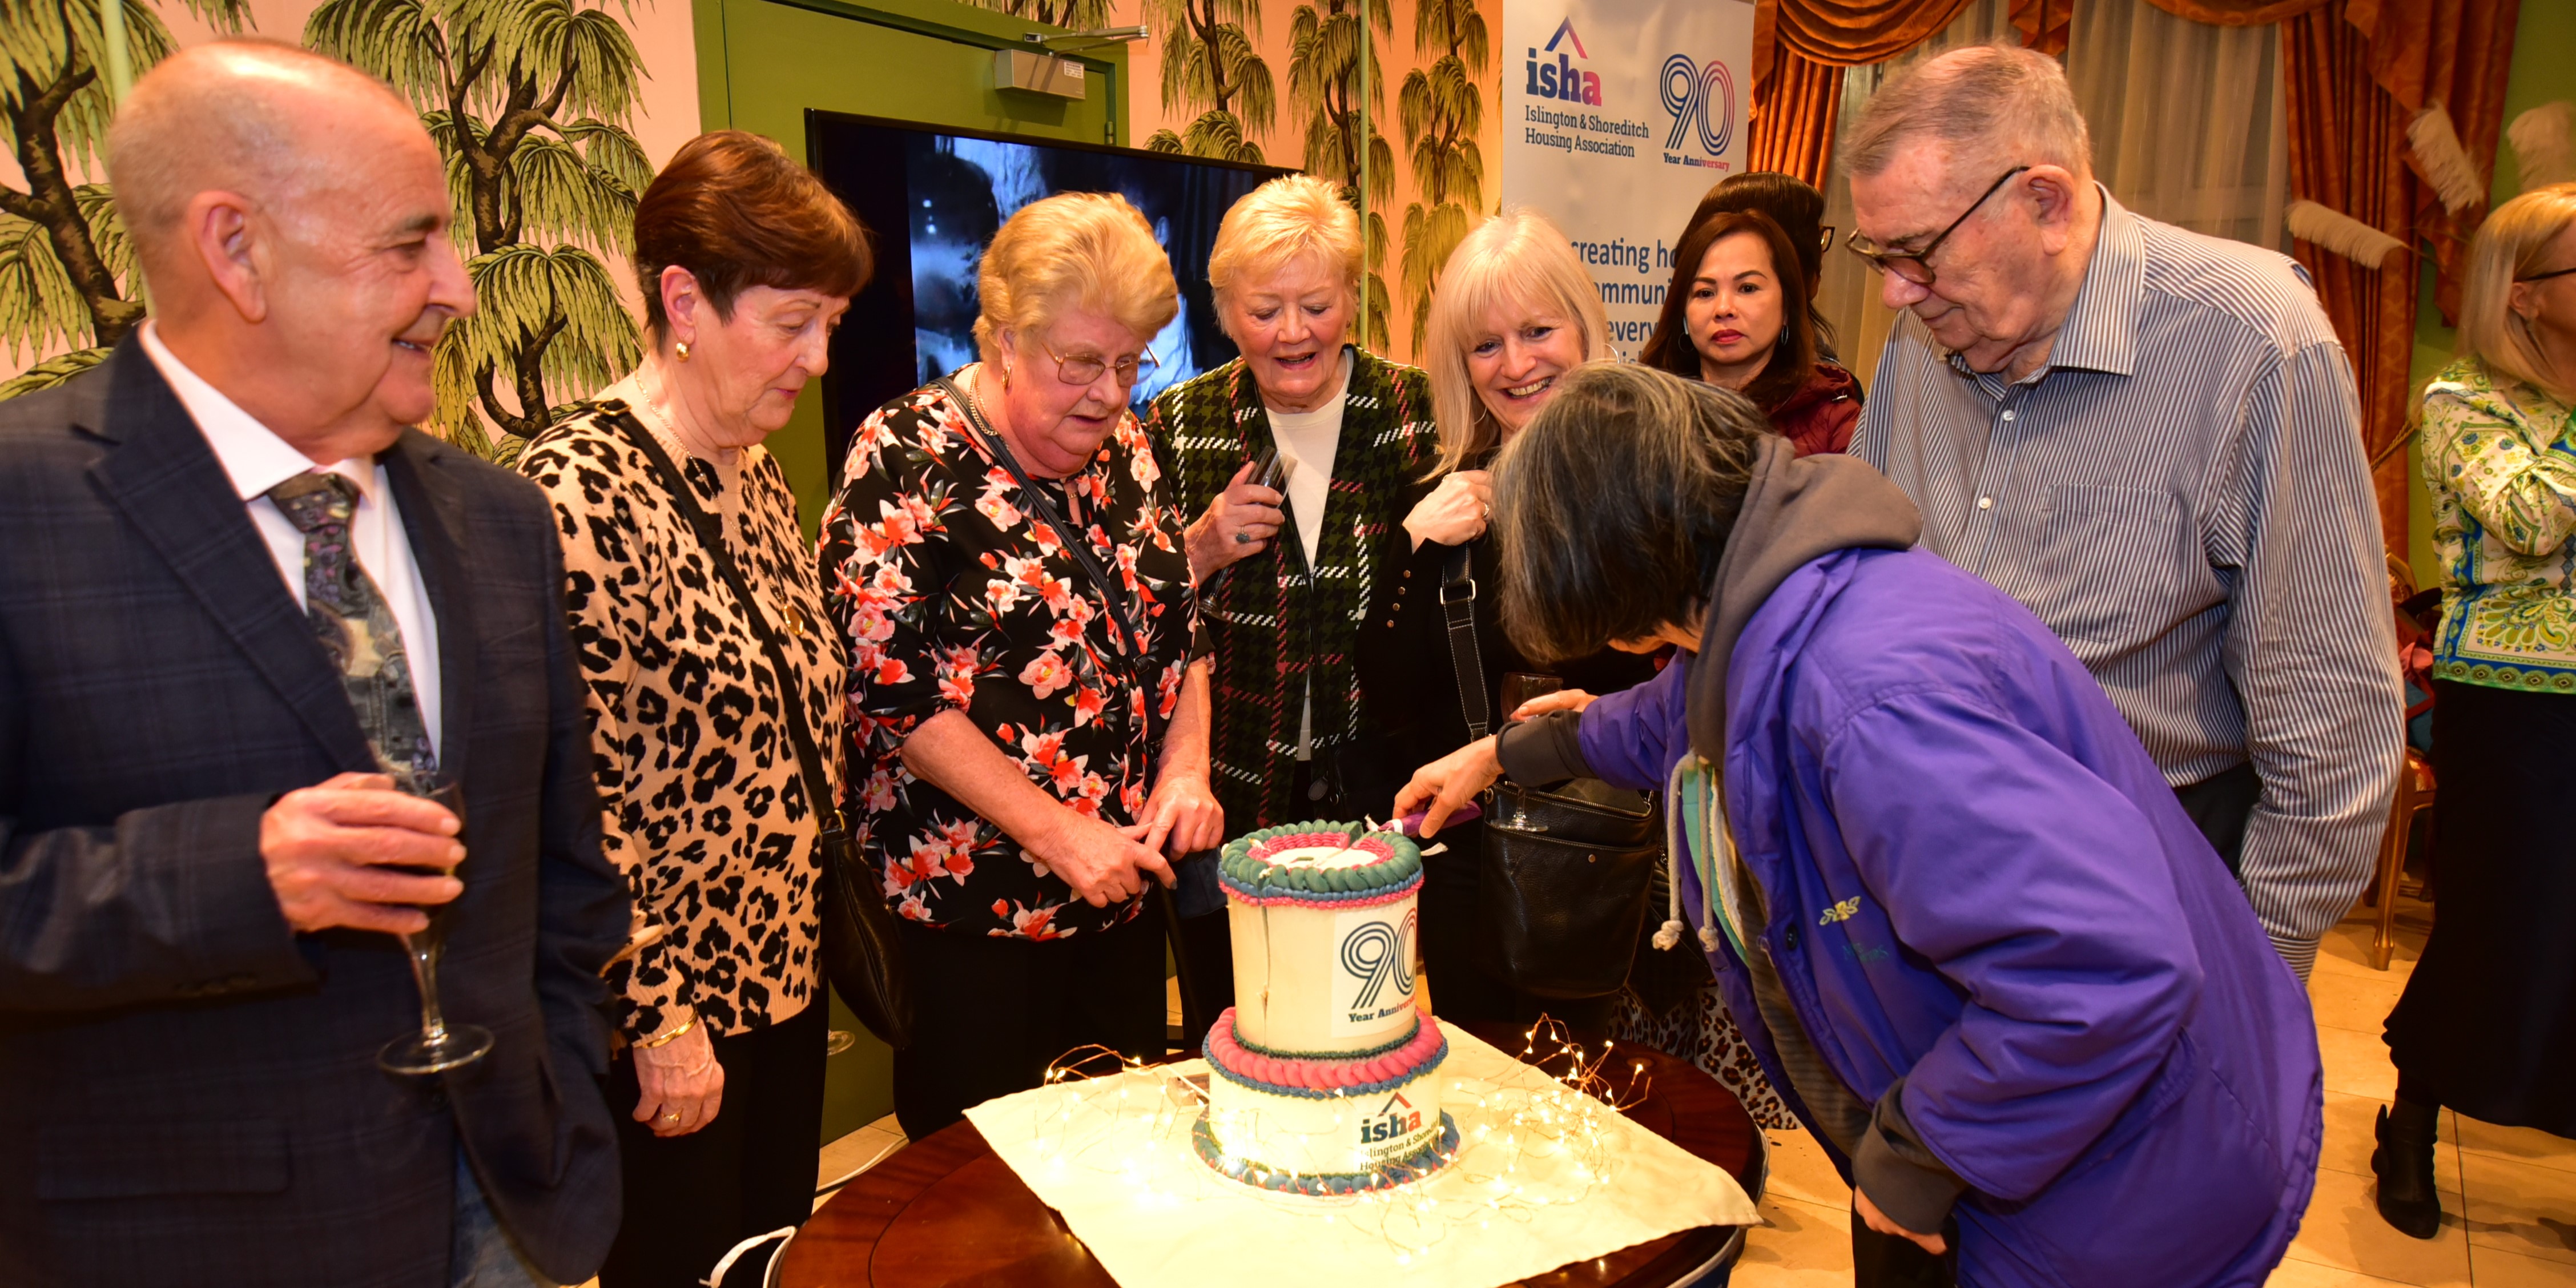 ISHA residents cutting the cake at our 90th anniversary celebrations